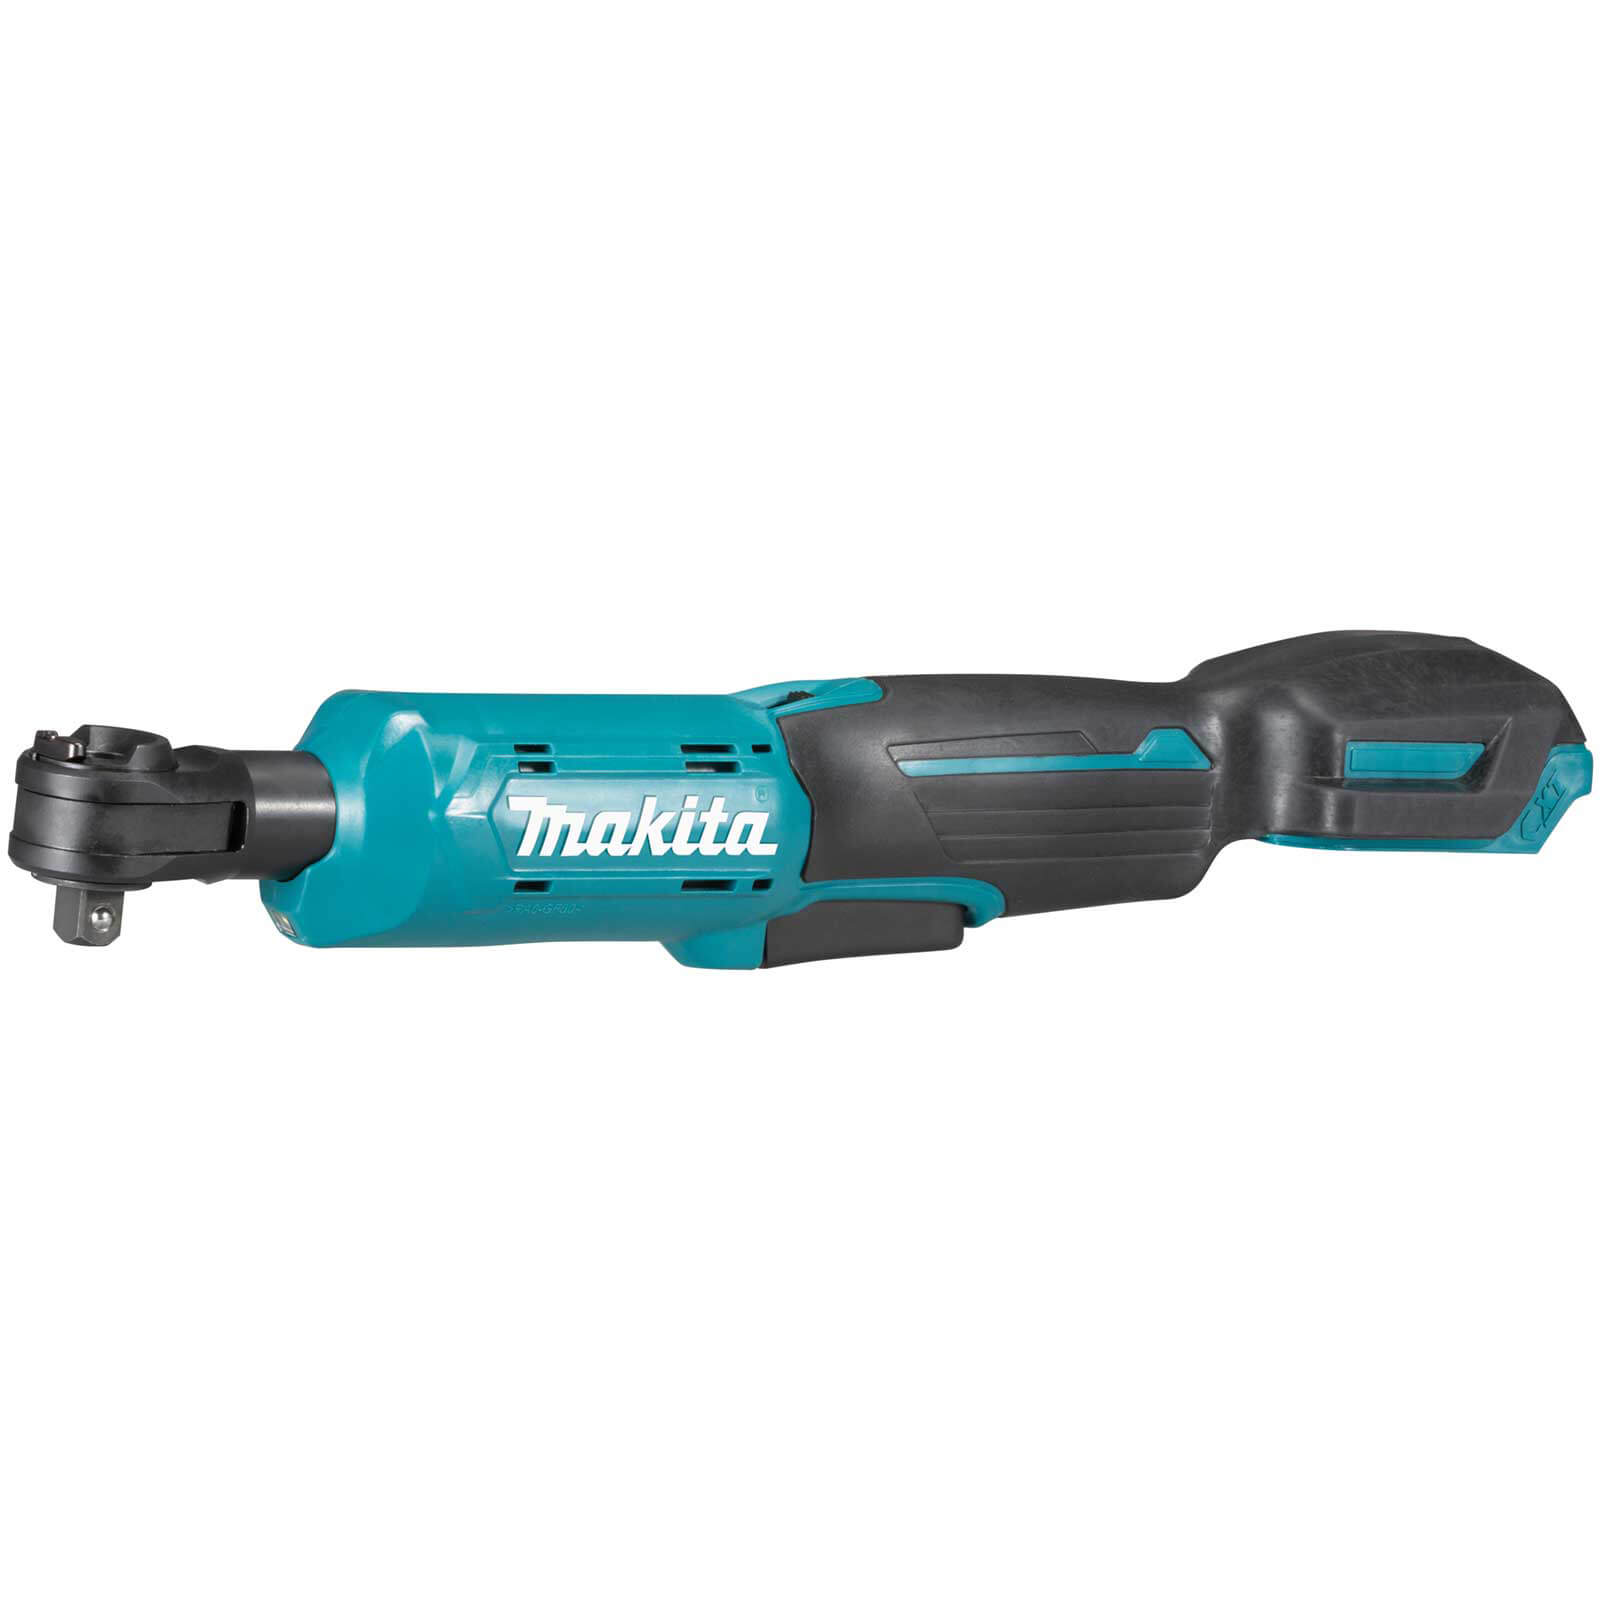 Image of Makita WR100D 12v Max CXT Ratchet Wrench No Batteries No Charger No Case